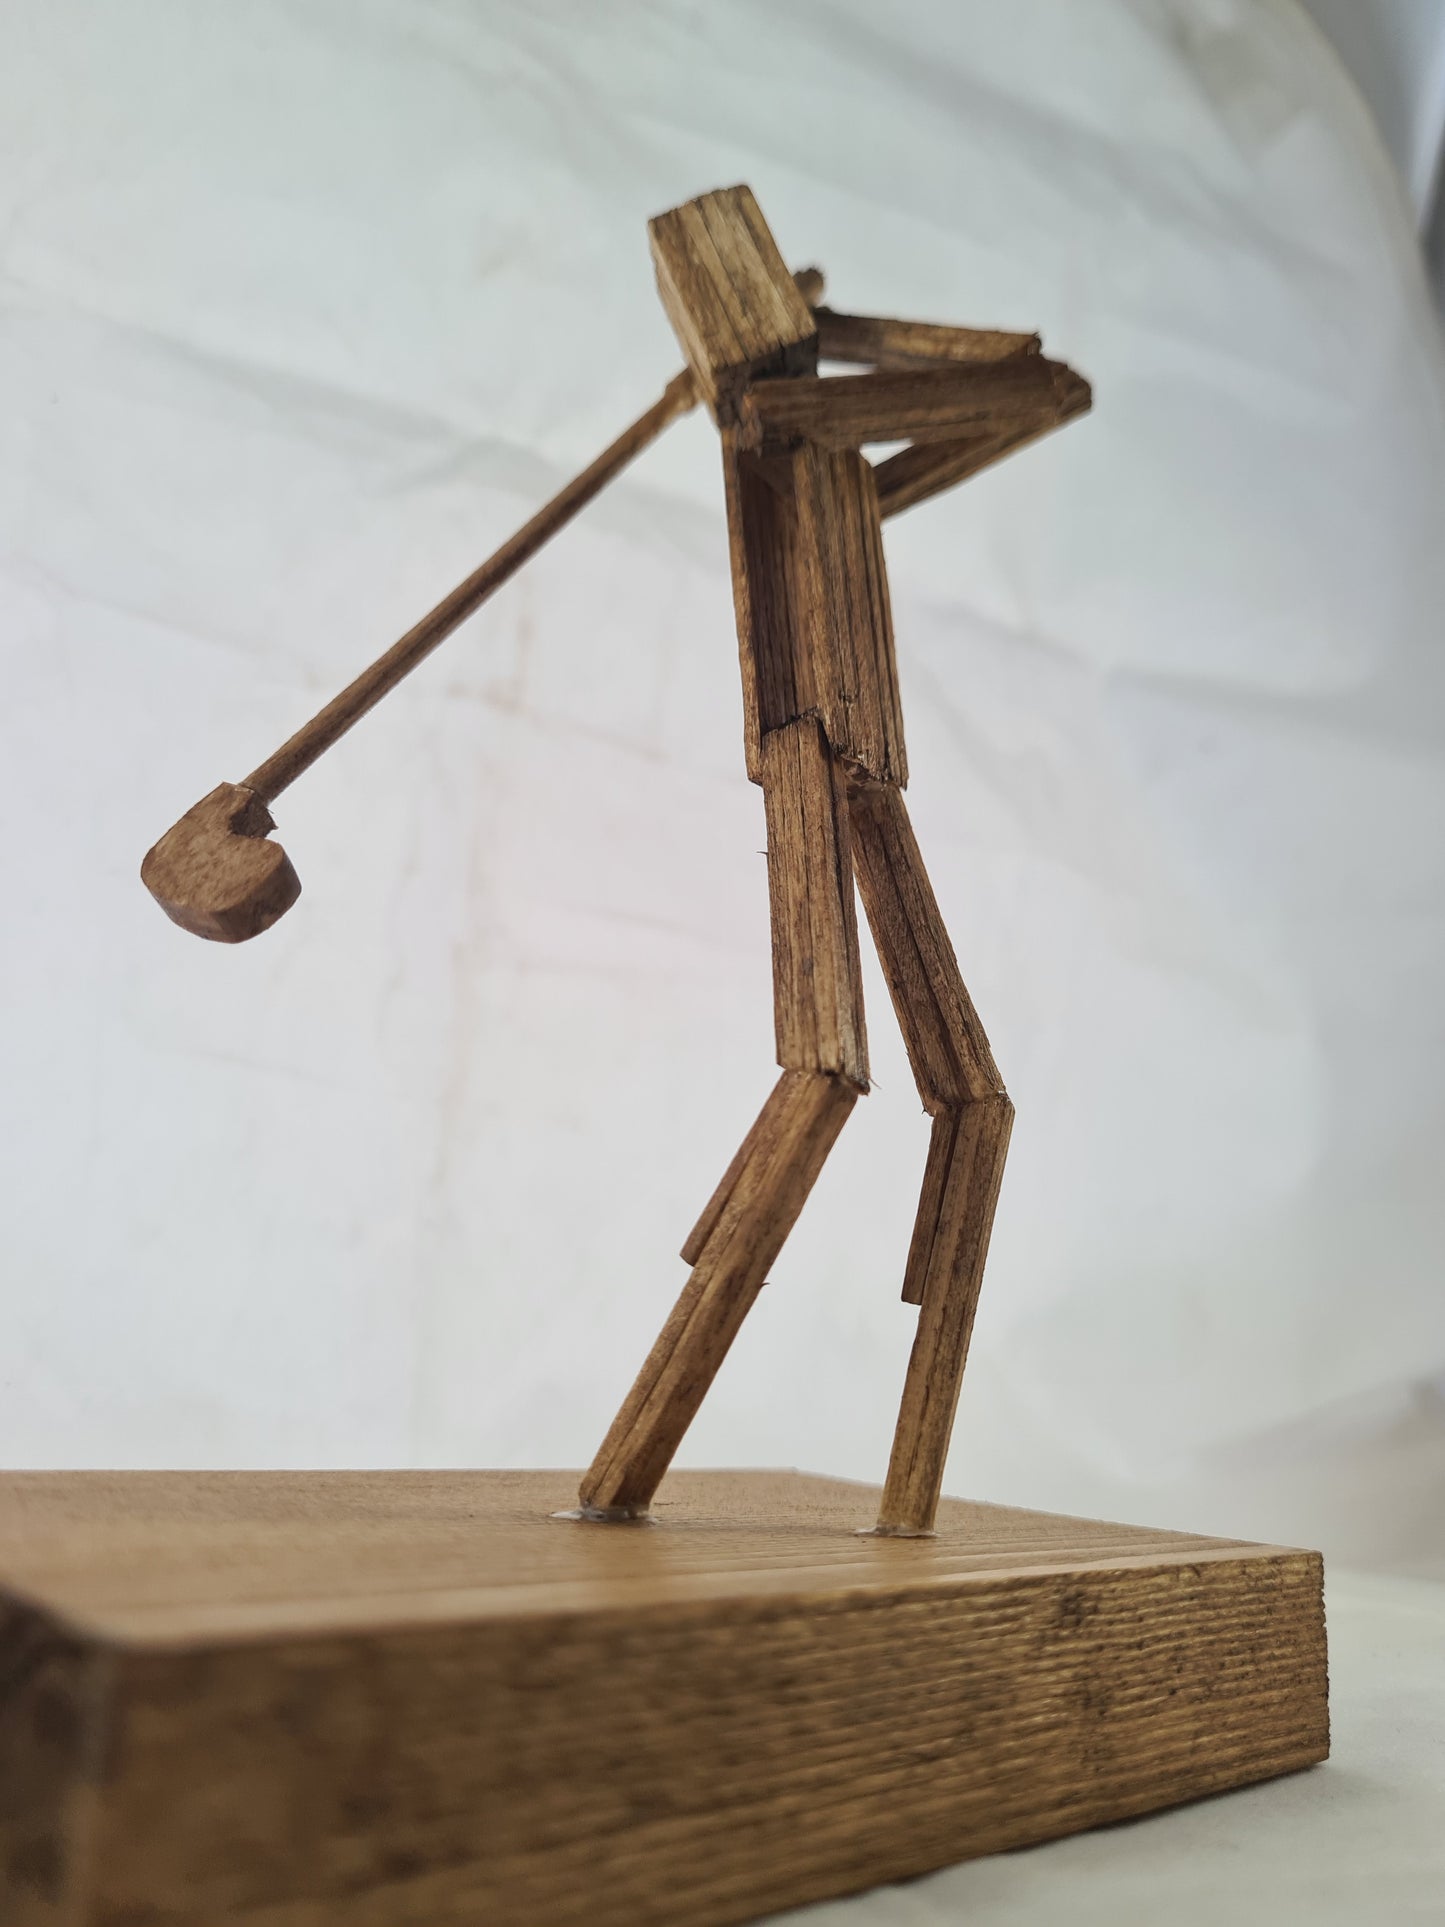 Golfer - Handcrafted Wooden Matchstick Figures - Gifts, Ornaments and Decor By Tiggidy Designs